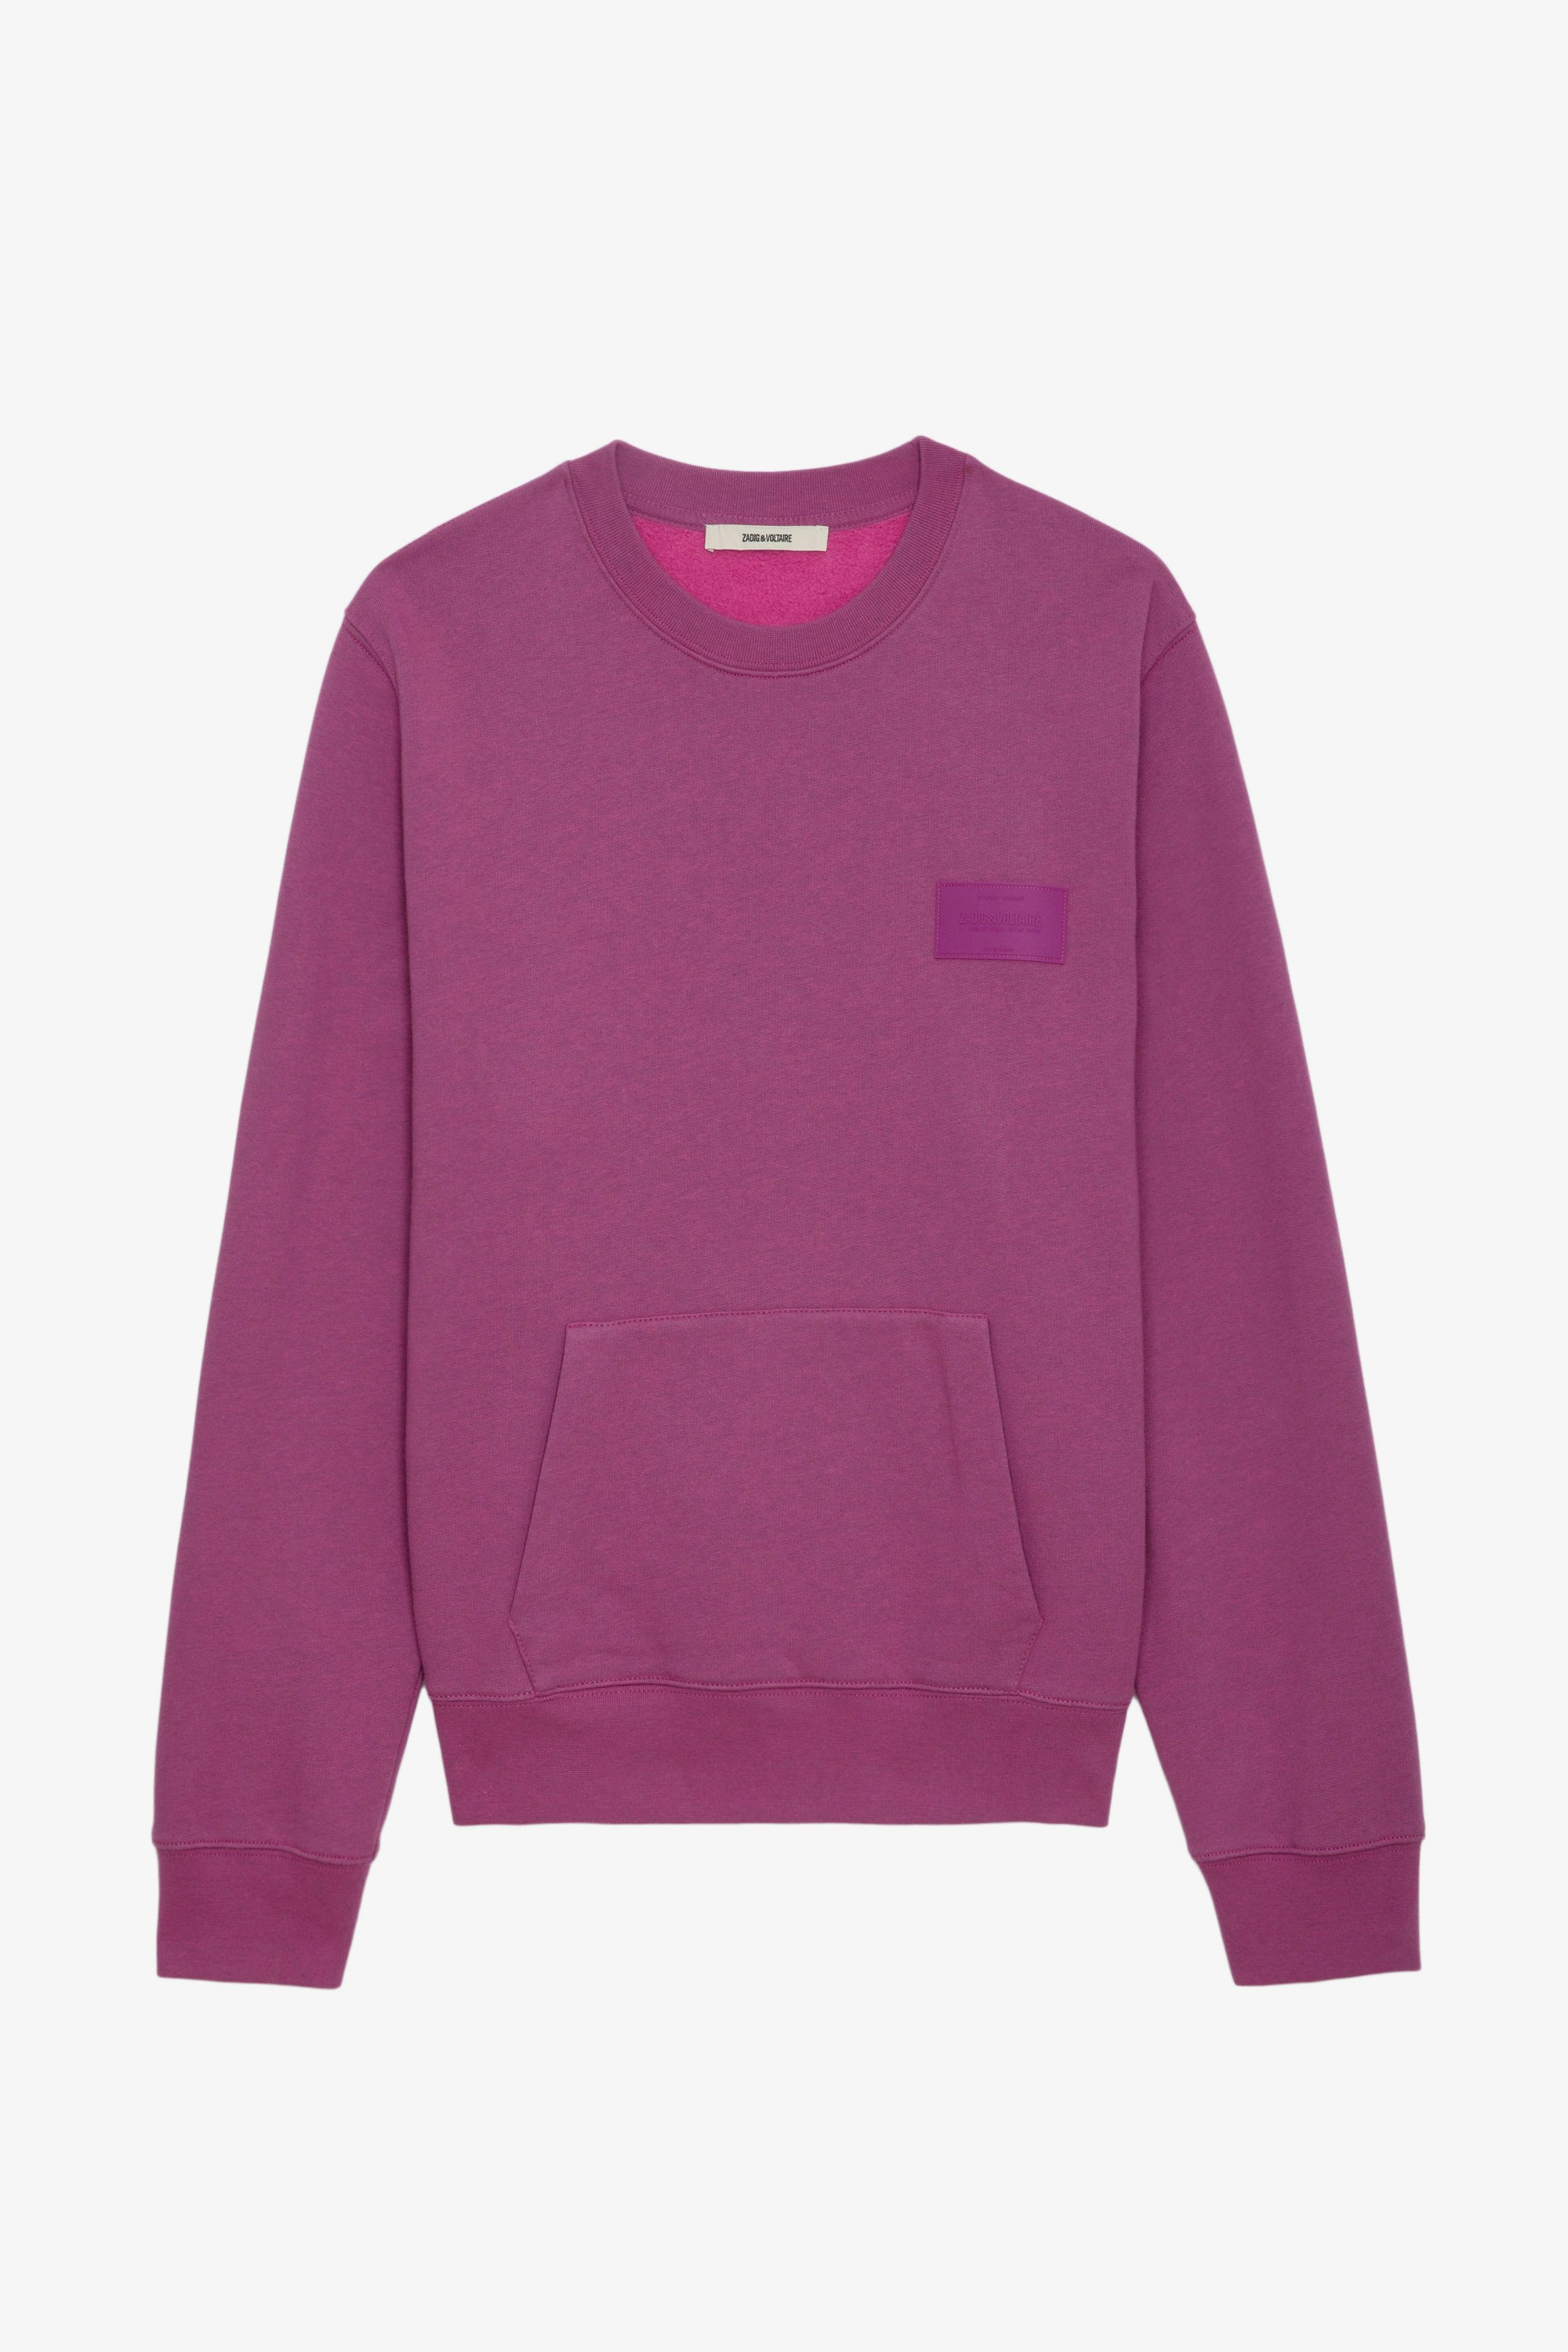 Aime Sweatshirt - Fuchsia long-sleeved round-neck sweatshirt with patch on the chest.